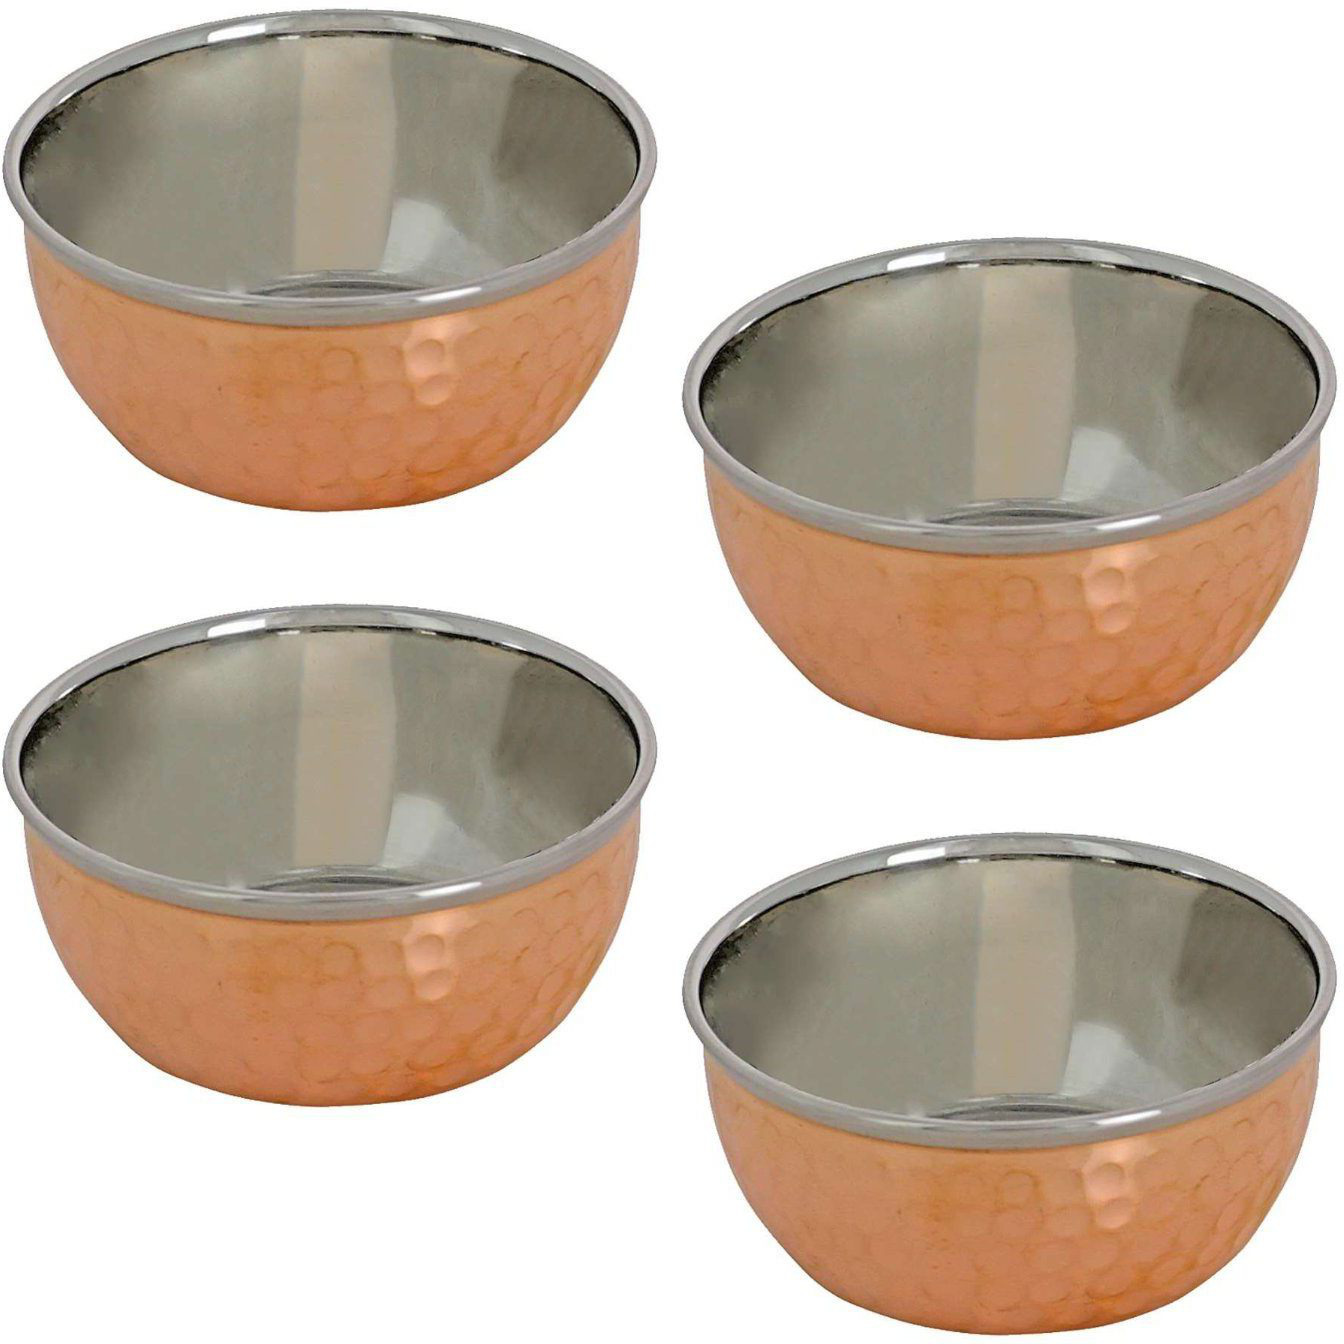 Prisha India Craft B. Set of 5 Dinnerware Traditional Stainless Steel Copper Dinner Set of Thali Plate, Bowls, Glass and Spoons, Dia 13  With 1 Luxury Style Pure Copper Pitcher Jug - Christmas Gift